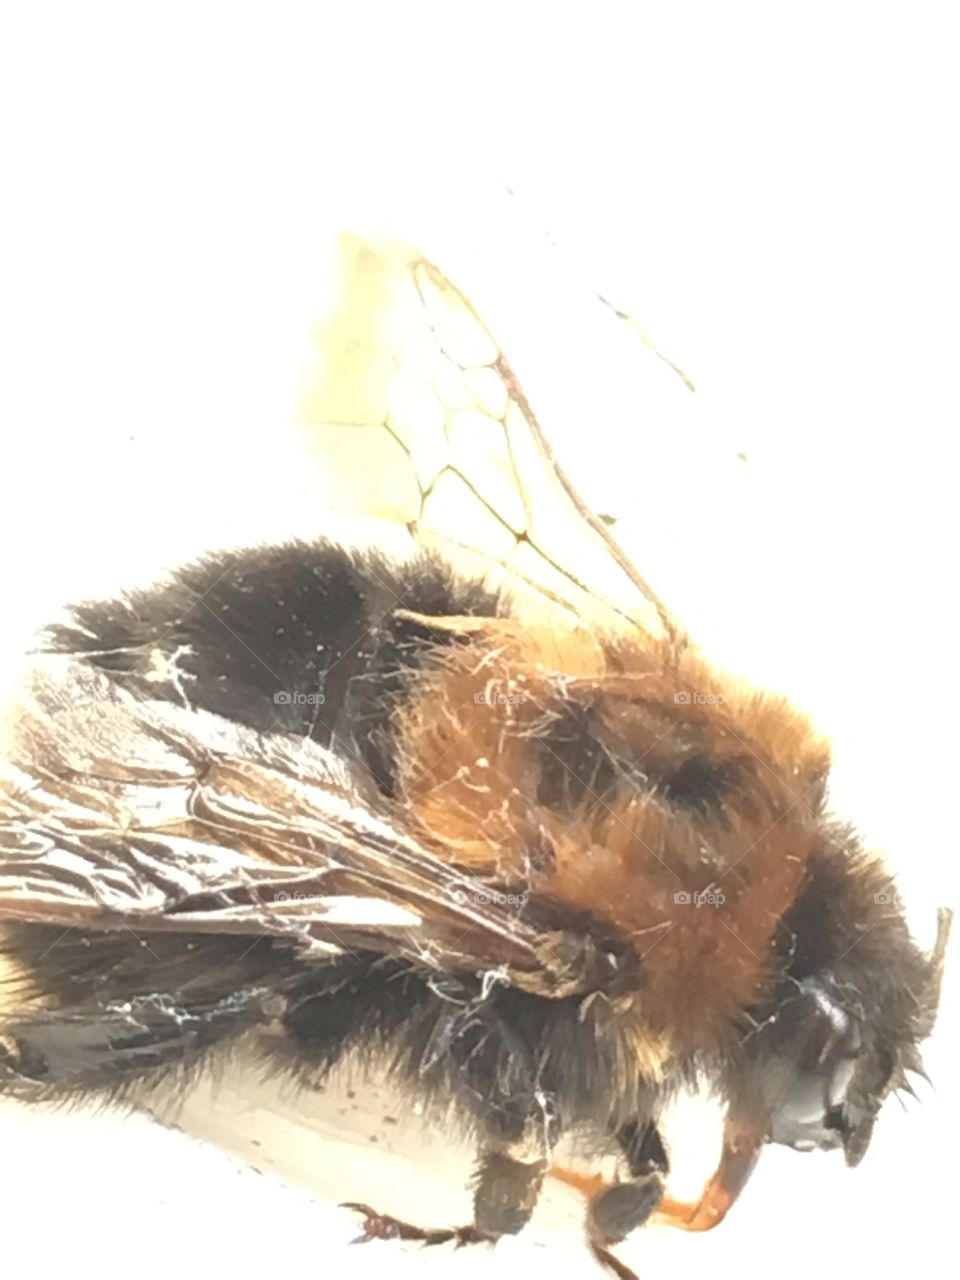 Injured tree bumble bee in close up drinking sugar water to recover Strength 